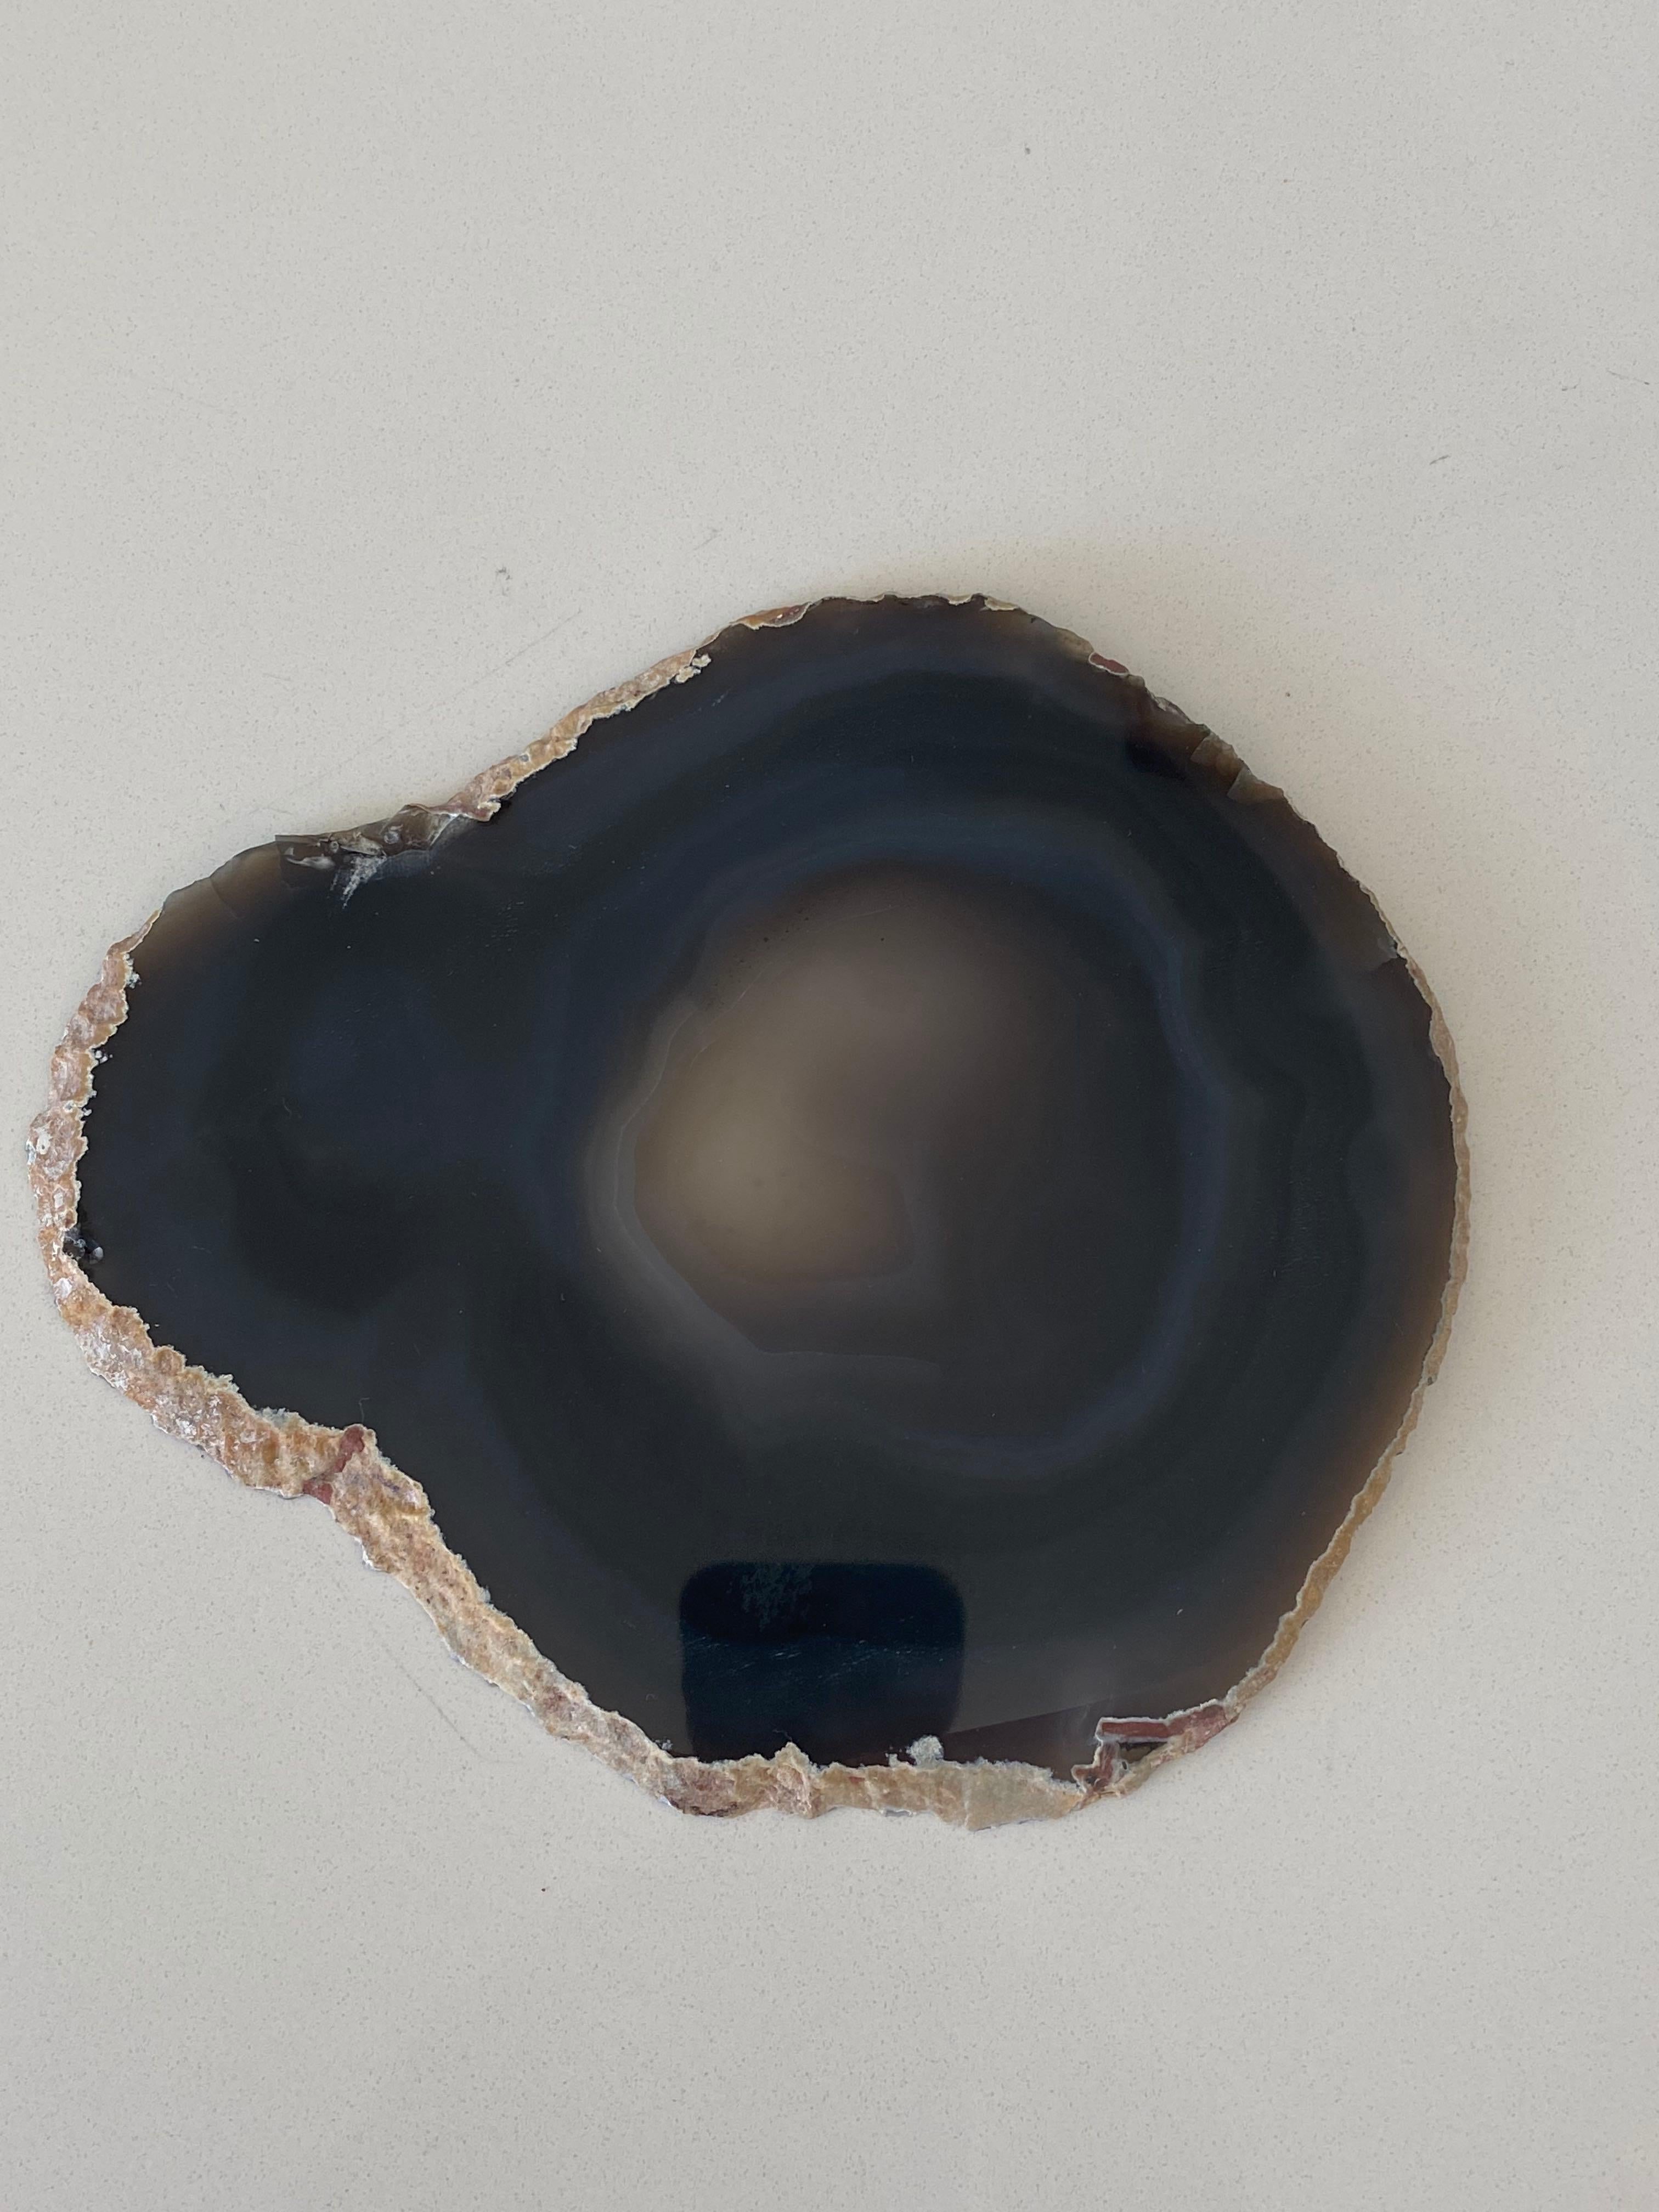 Brazilian thin slice of dark grey agate mounted on a wood stand.
Agate is a banded form of finely-grained, microcrystalline Quartz. 
The lovely color patterns and banding make this translucent gemstone very unique. 
Agates can have many